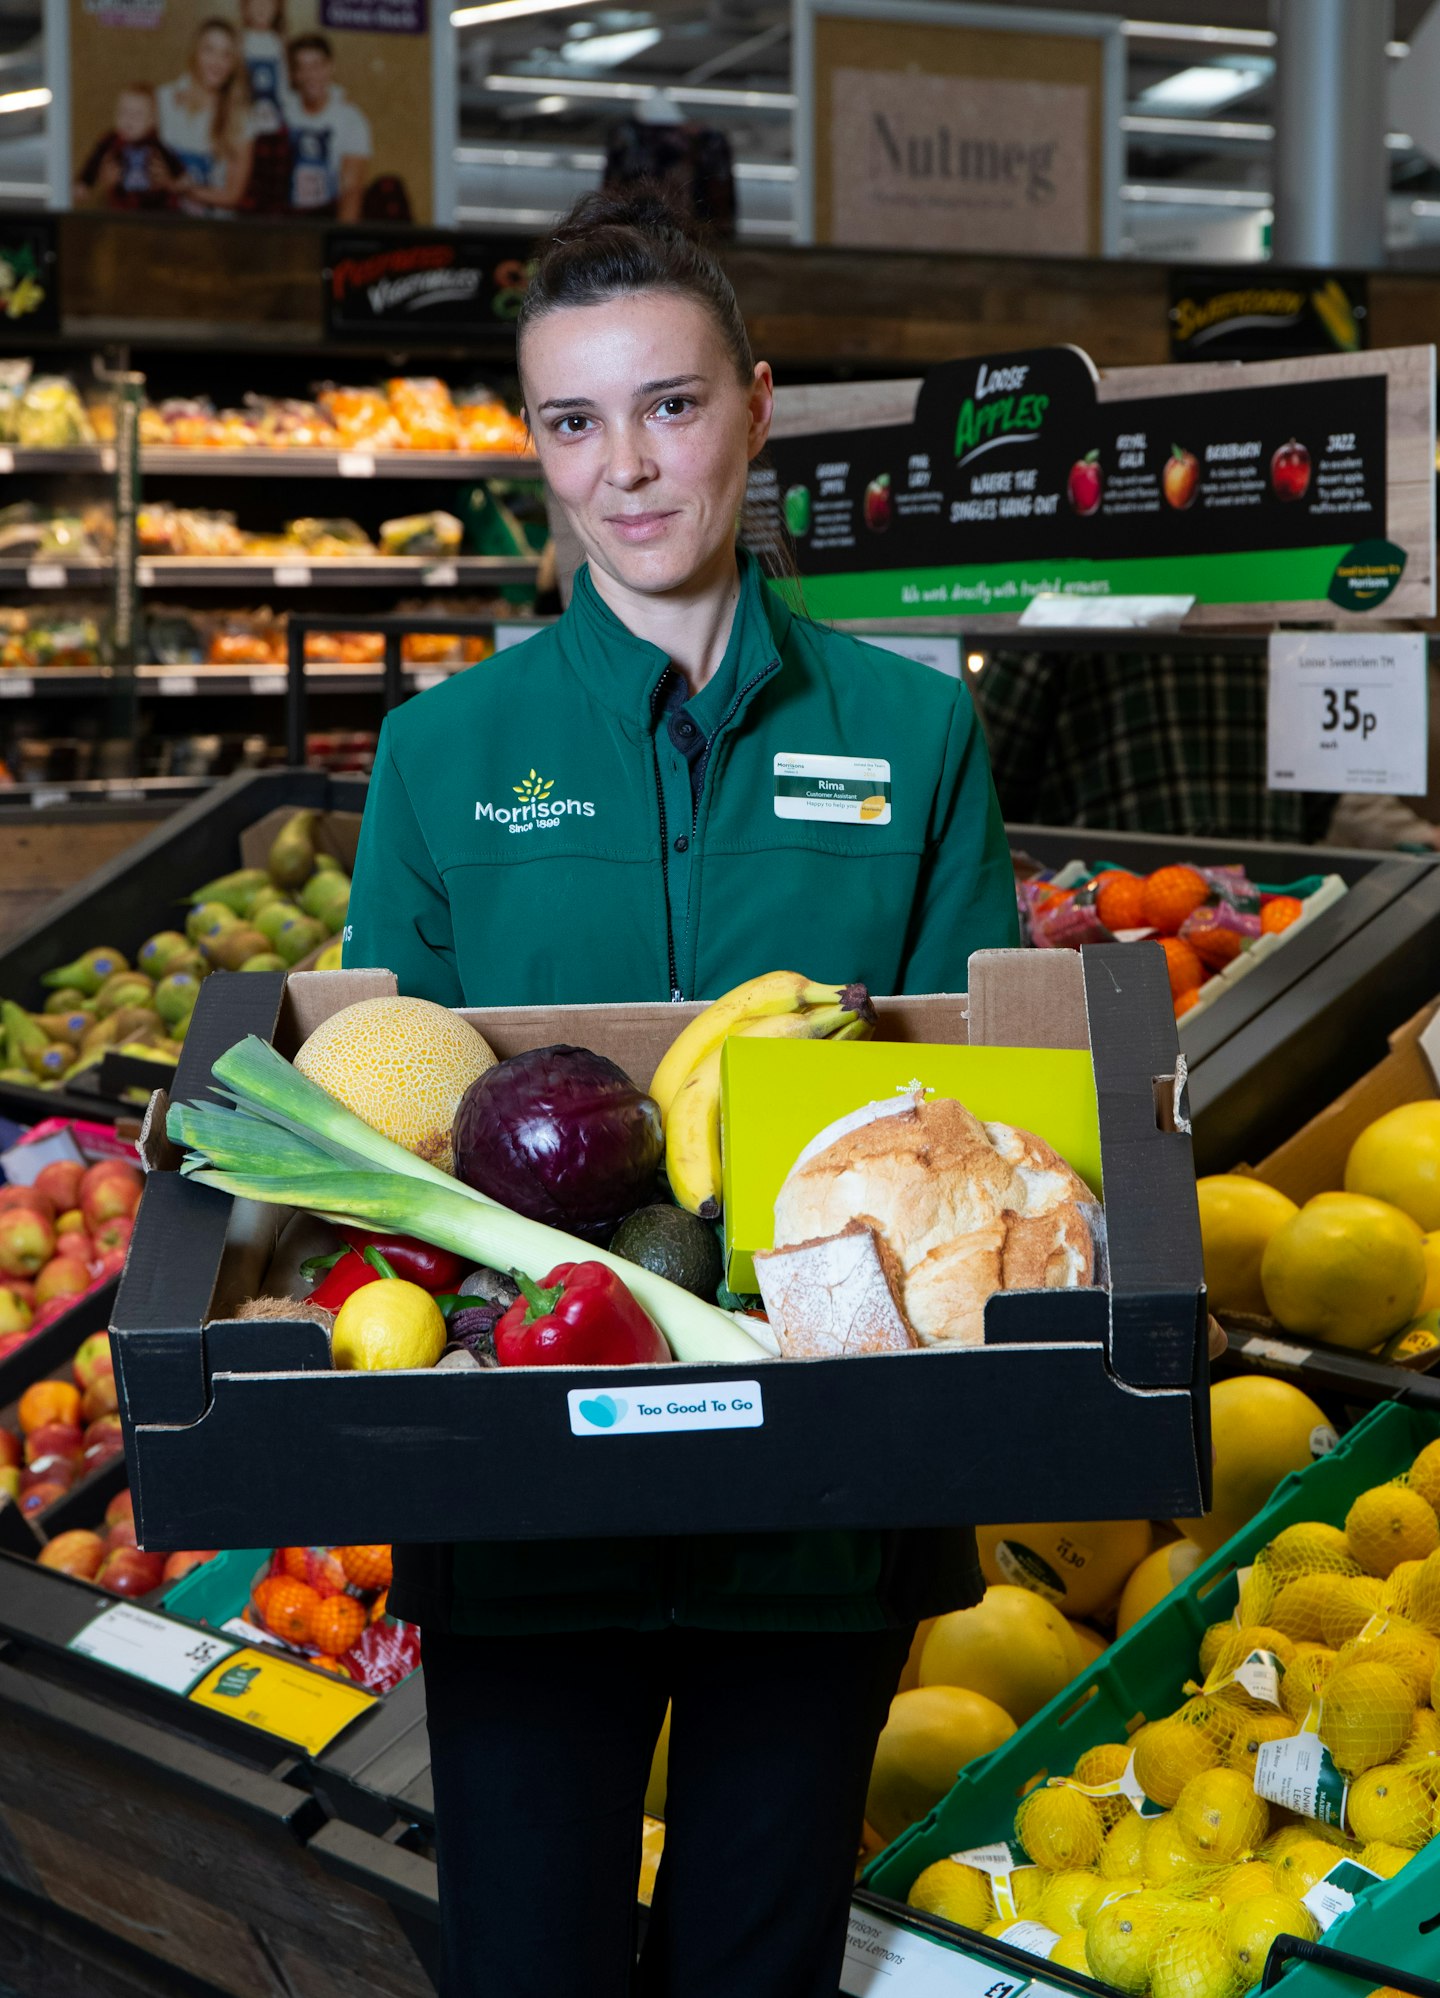 Morrisons Too Good To Go Food Waste Box